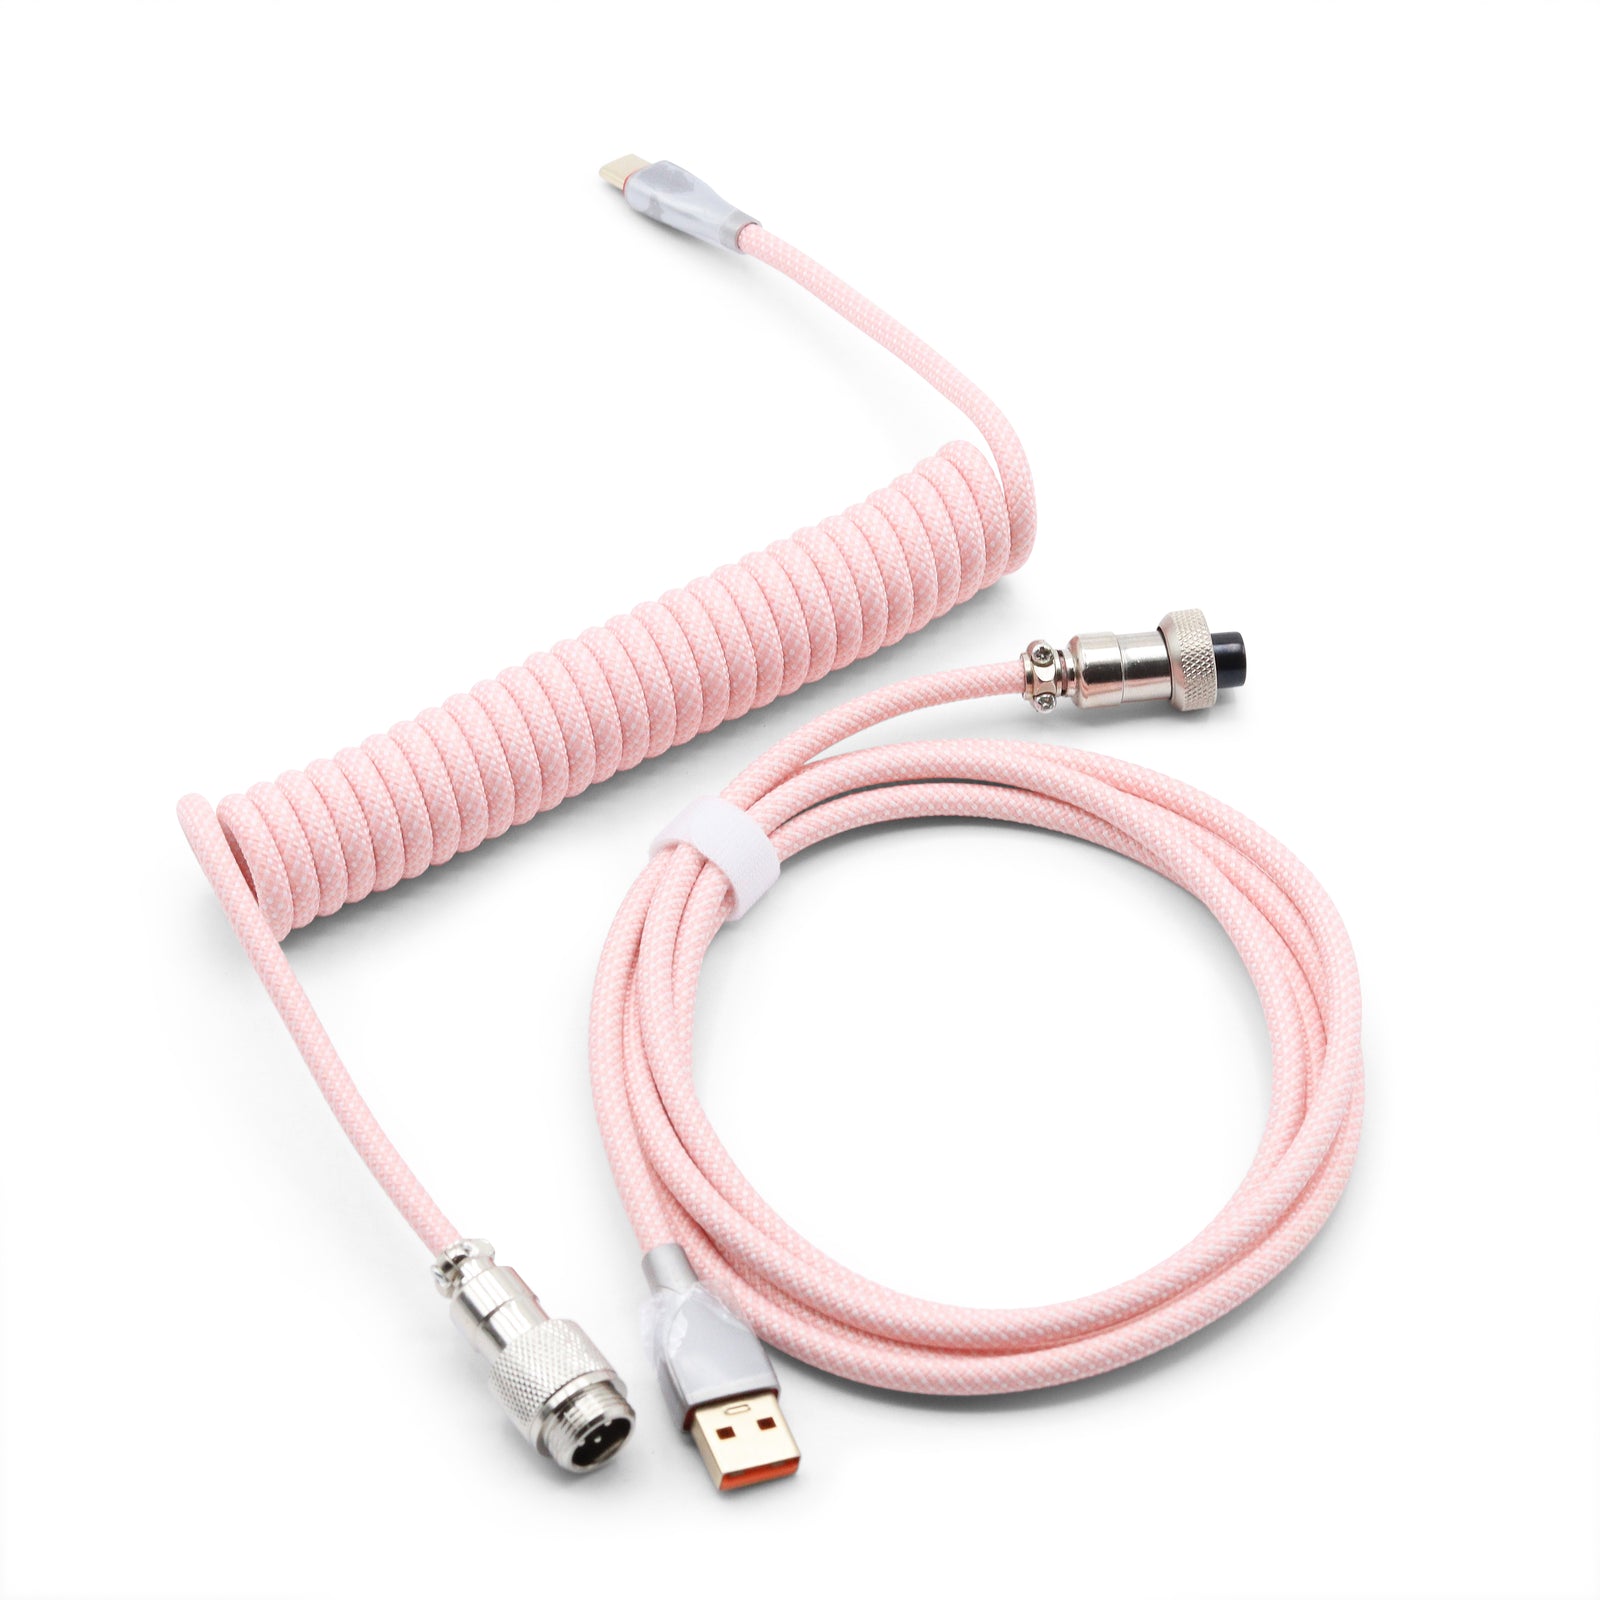 Glacier Premium Durable Quality Braided USB-C to USB-A Coiled Cable with Detachable Metal Aviator Connector Plug for Mechanical Keyboard